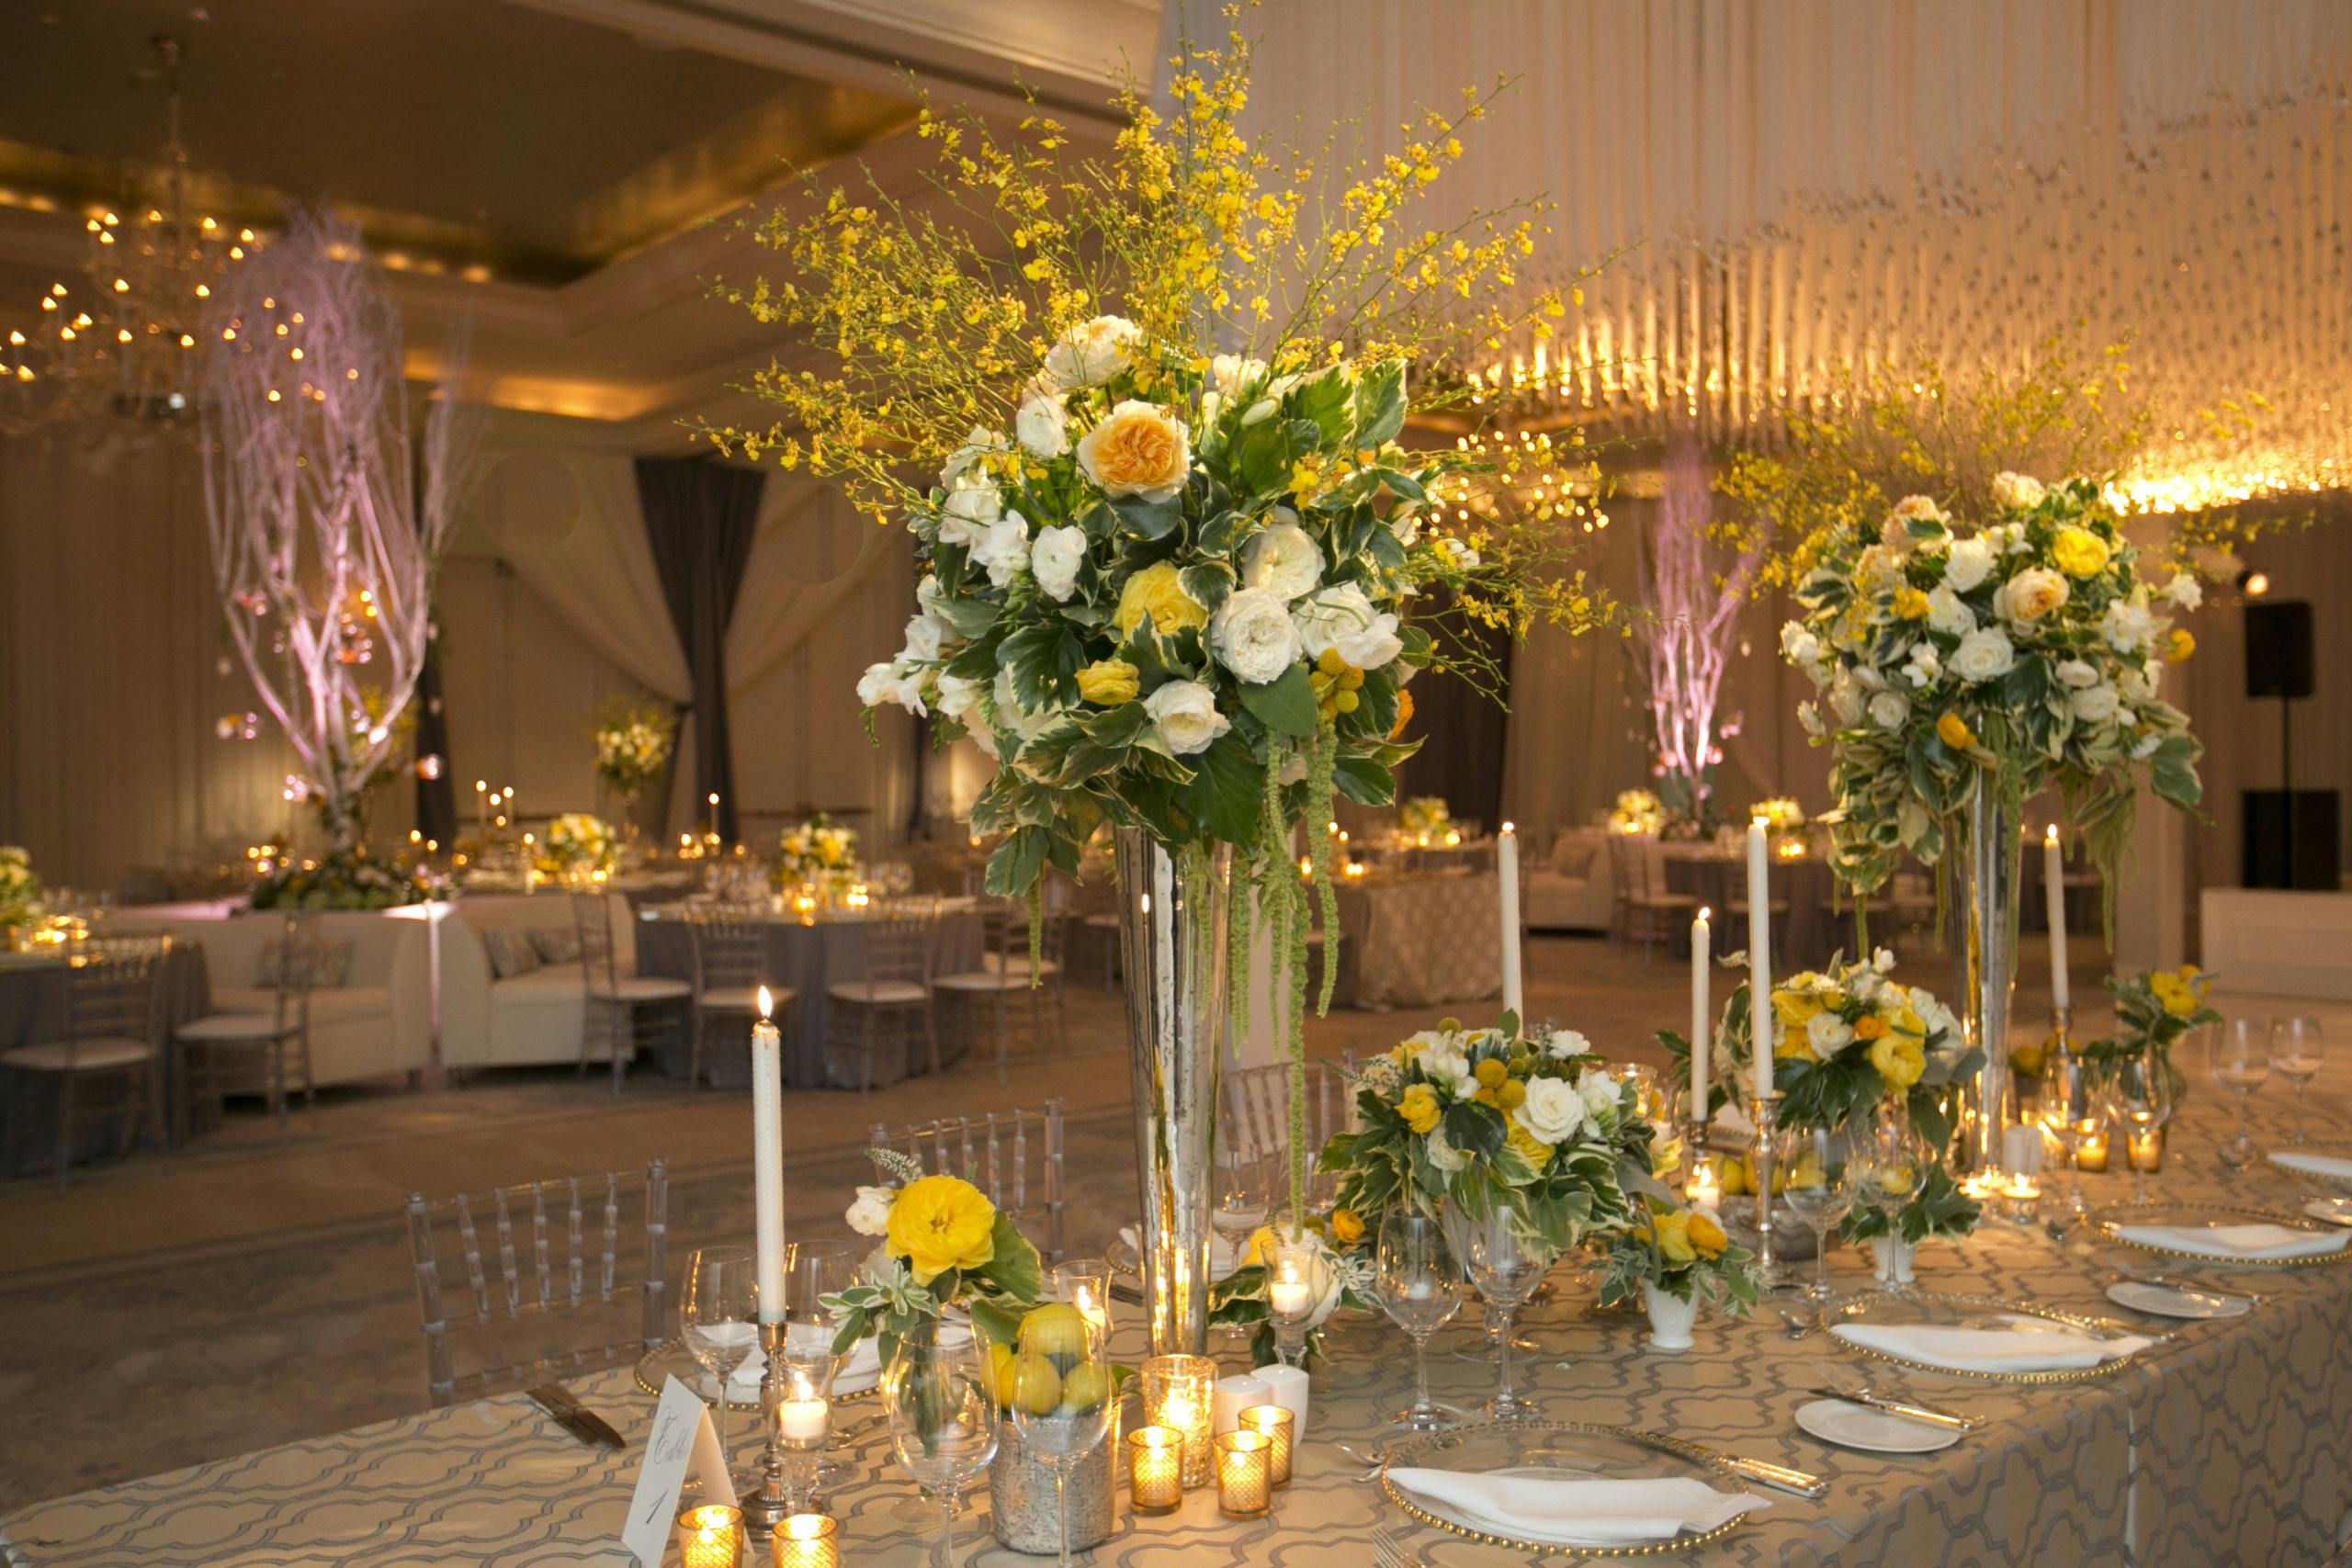 Photo of South Indian wedding decor with yellow and white florals